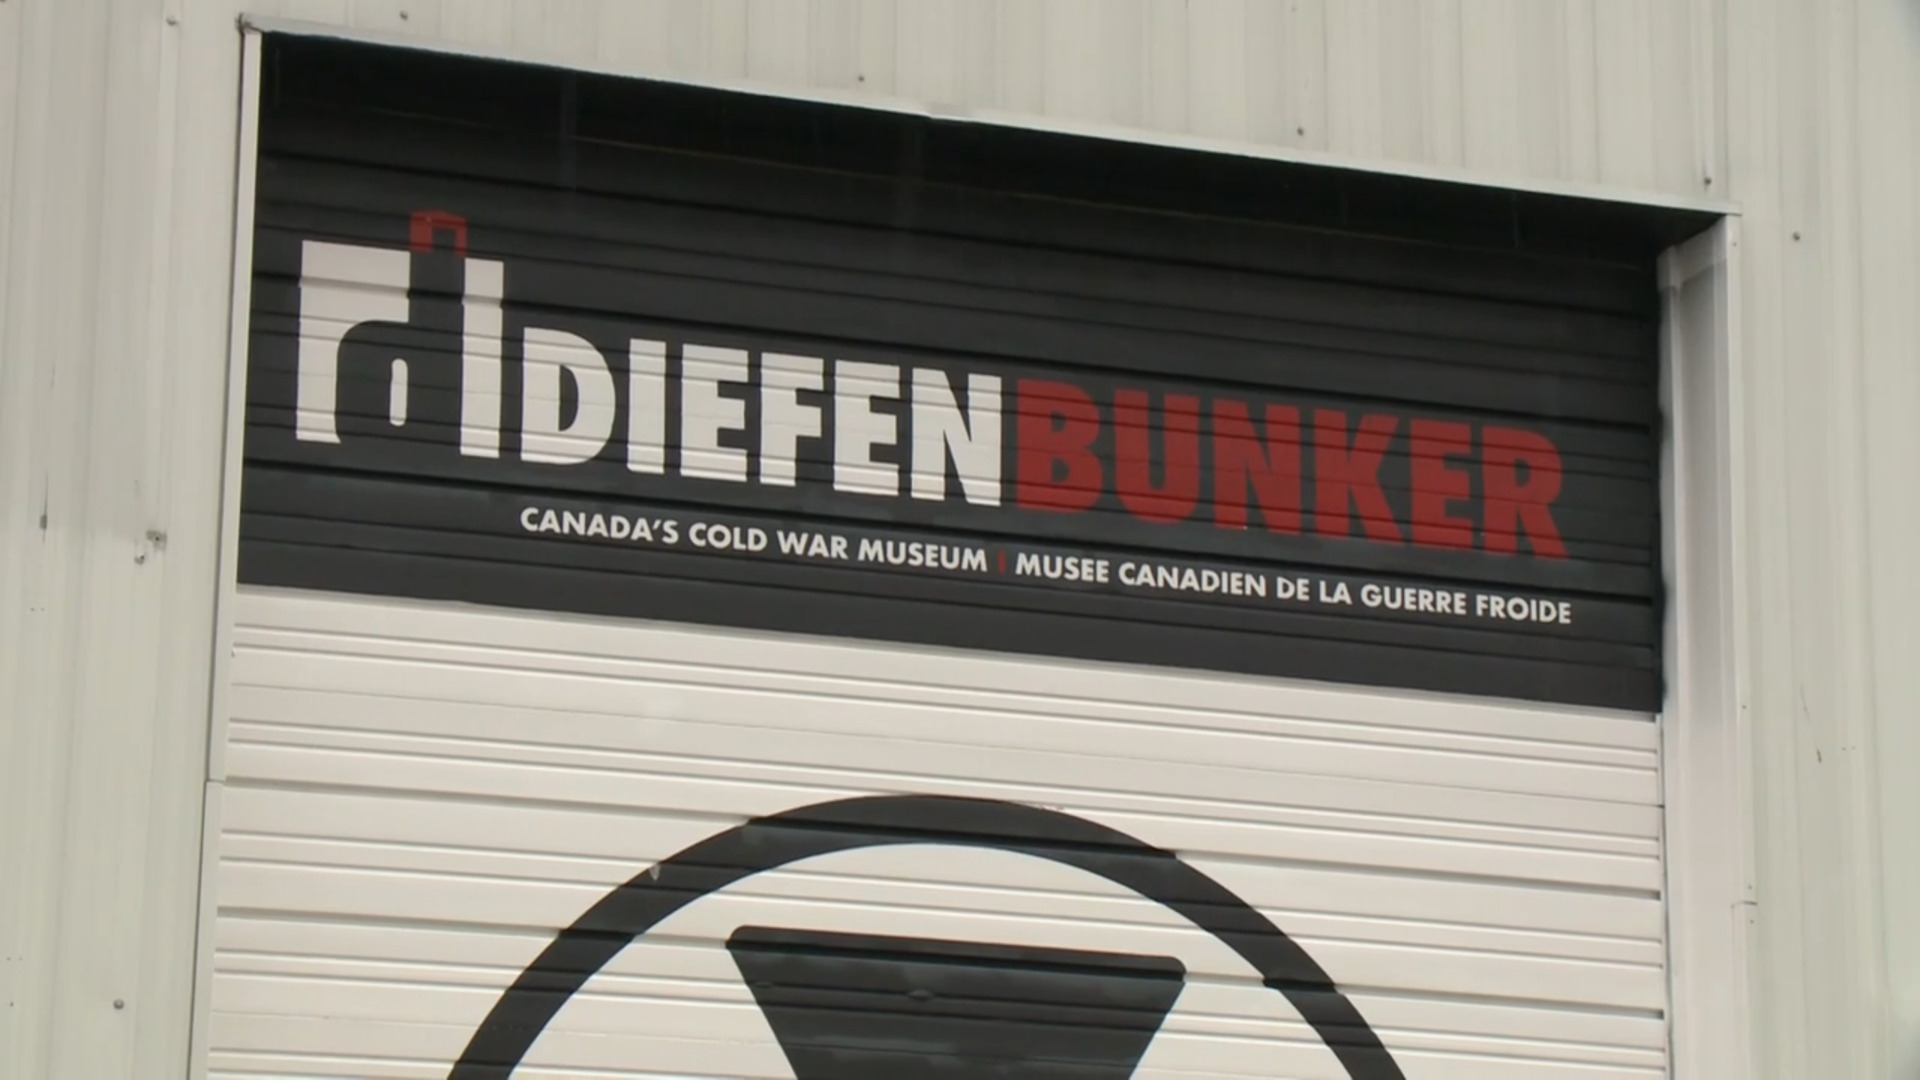 Diefenbunker receives funding from federal government